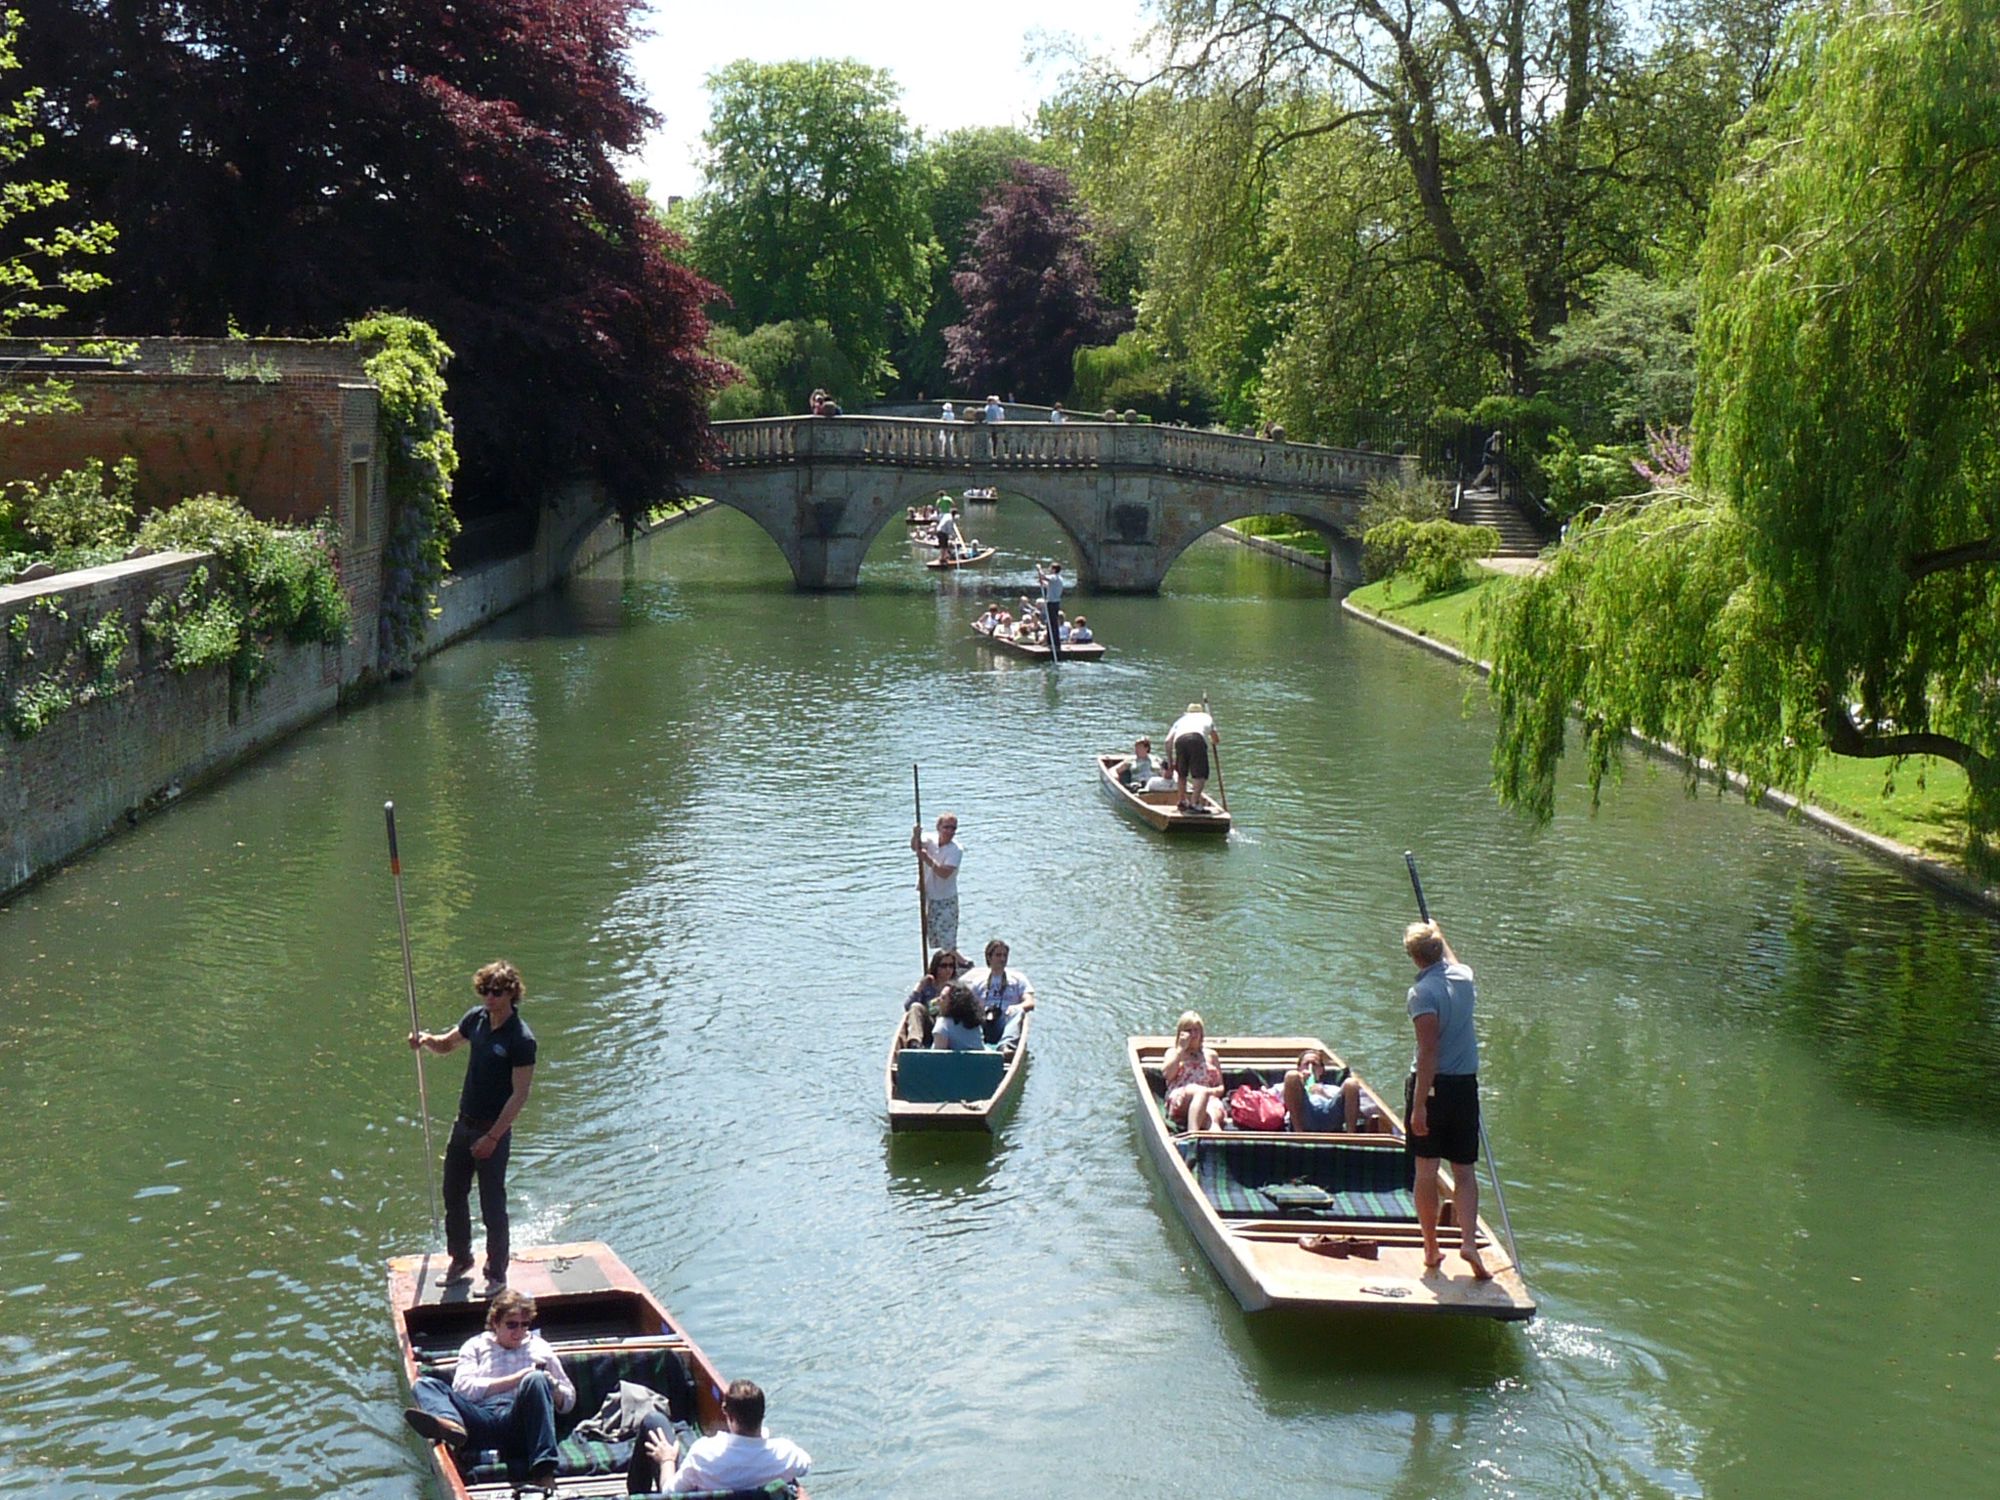 Hotels, B&Bs & Self-Catering in Cambridge